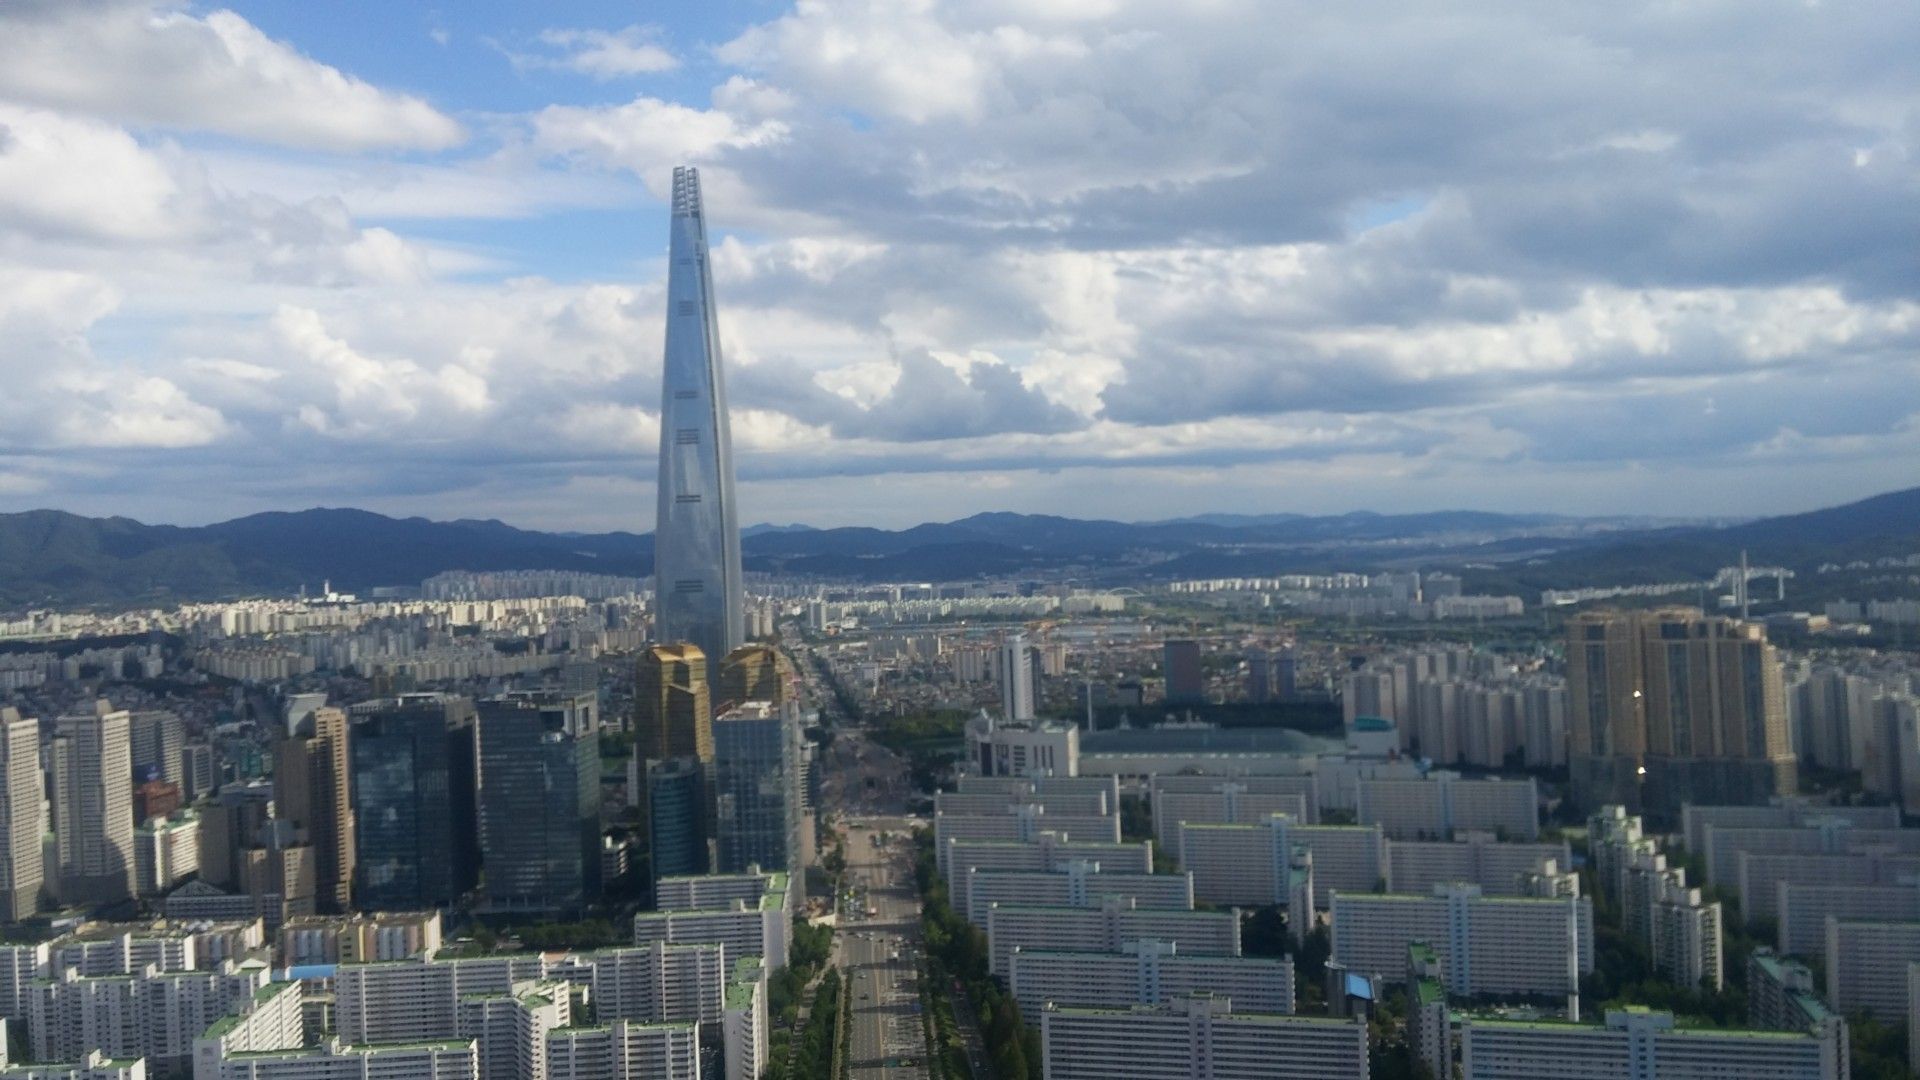 Lotte World Tower: the world's fifth tallest skyscraper is in Seoul